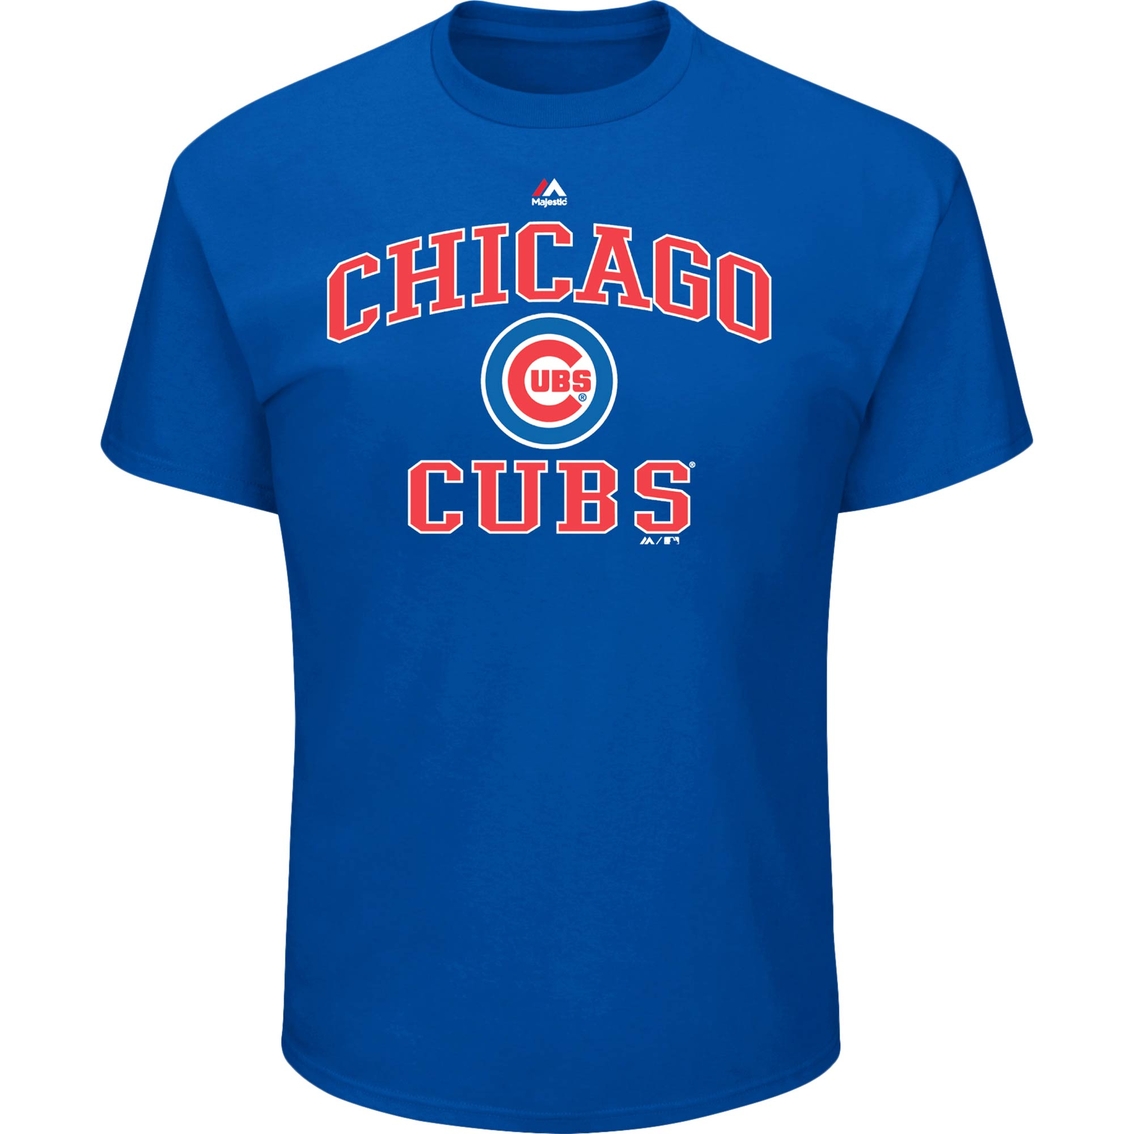 Majestic Athletic MLB Chicago Cubs Heart and Soul Tee - Image 2 of 3